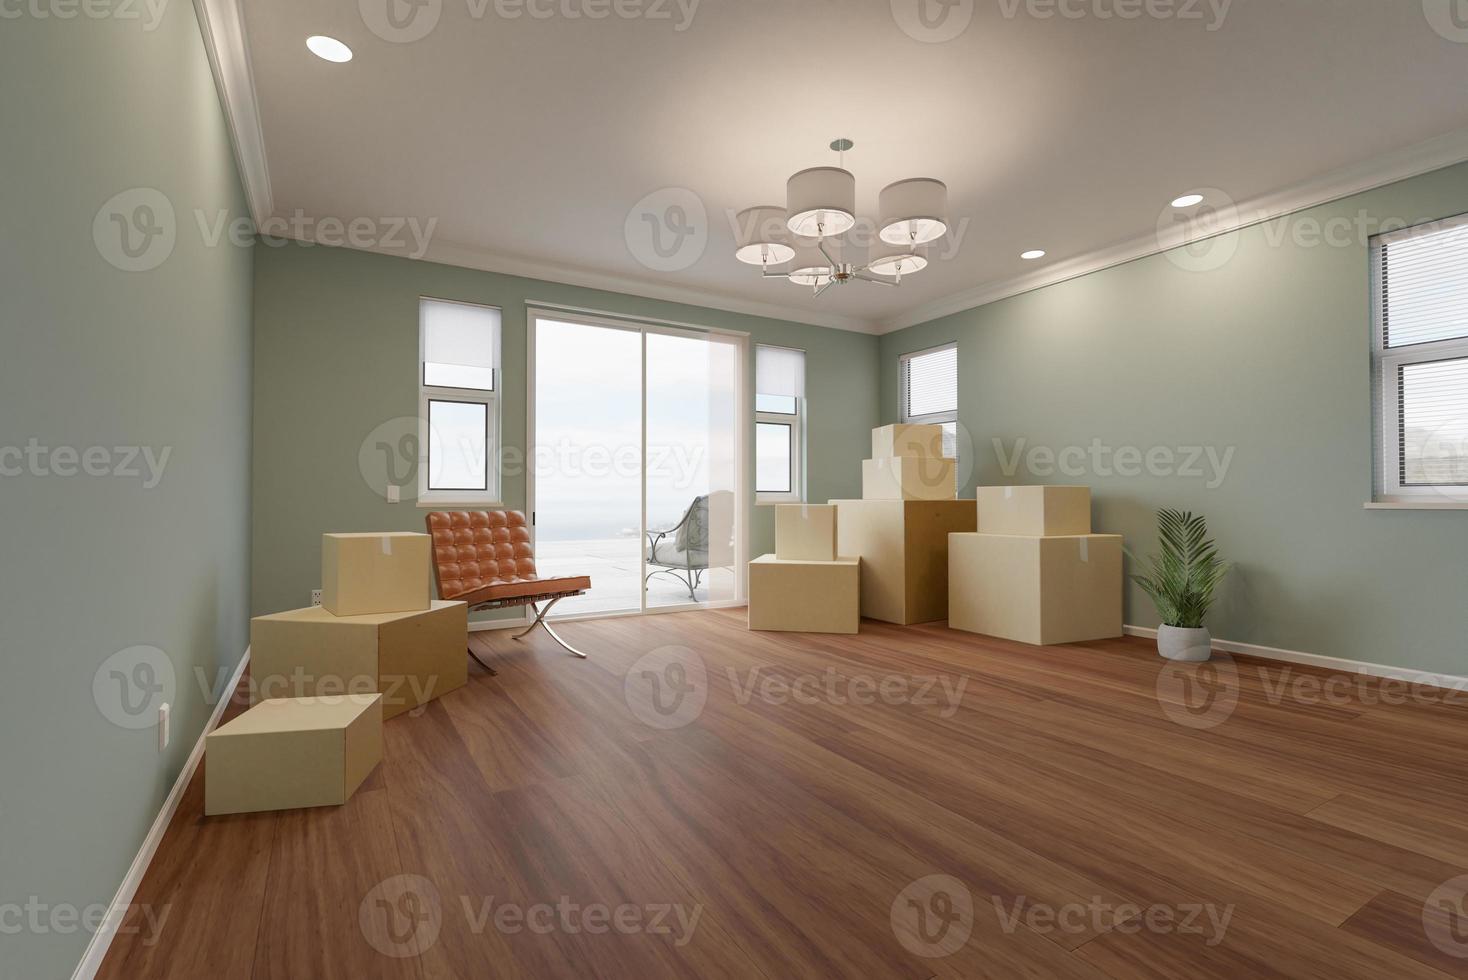 3D Illustration of Several Cardboard Moving Boxes, Chair and Plant on Floor of Empty Room of House. photo